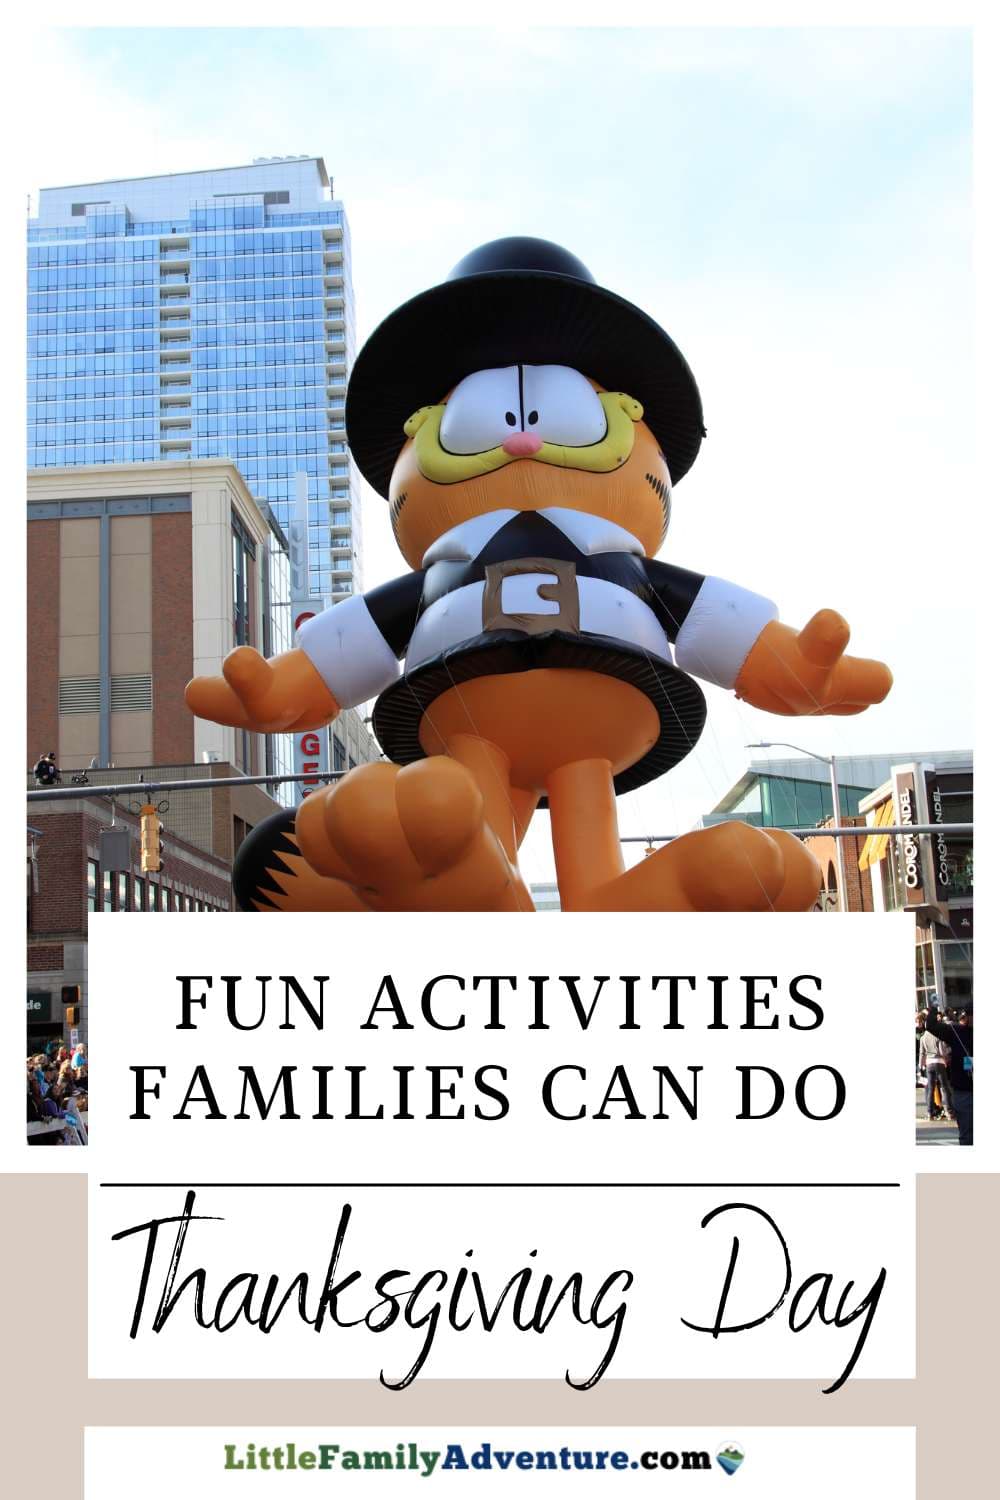 garfield float in the Thanksgiving parade with fun activities families can do at thanksgiving